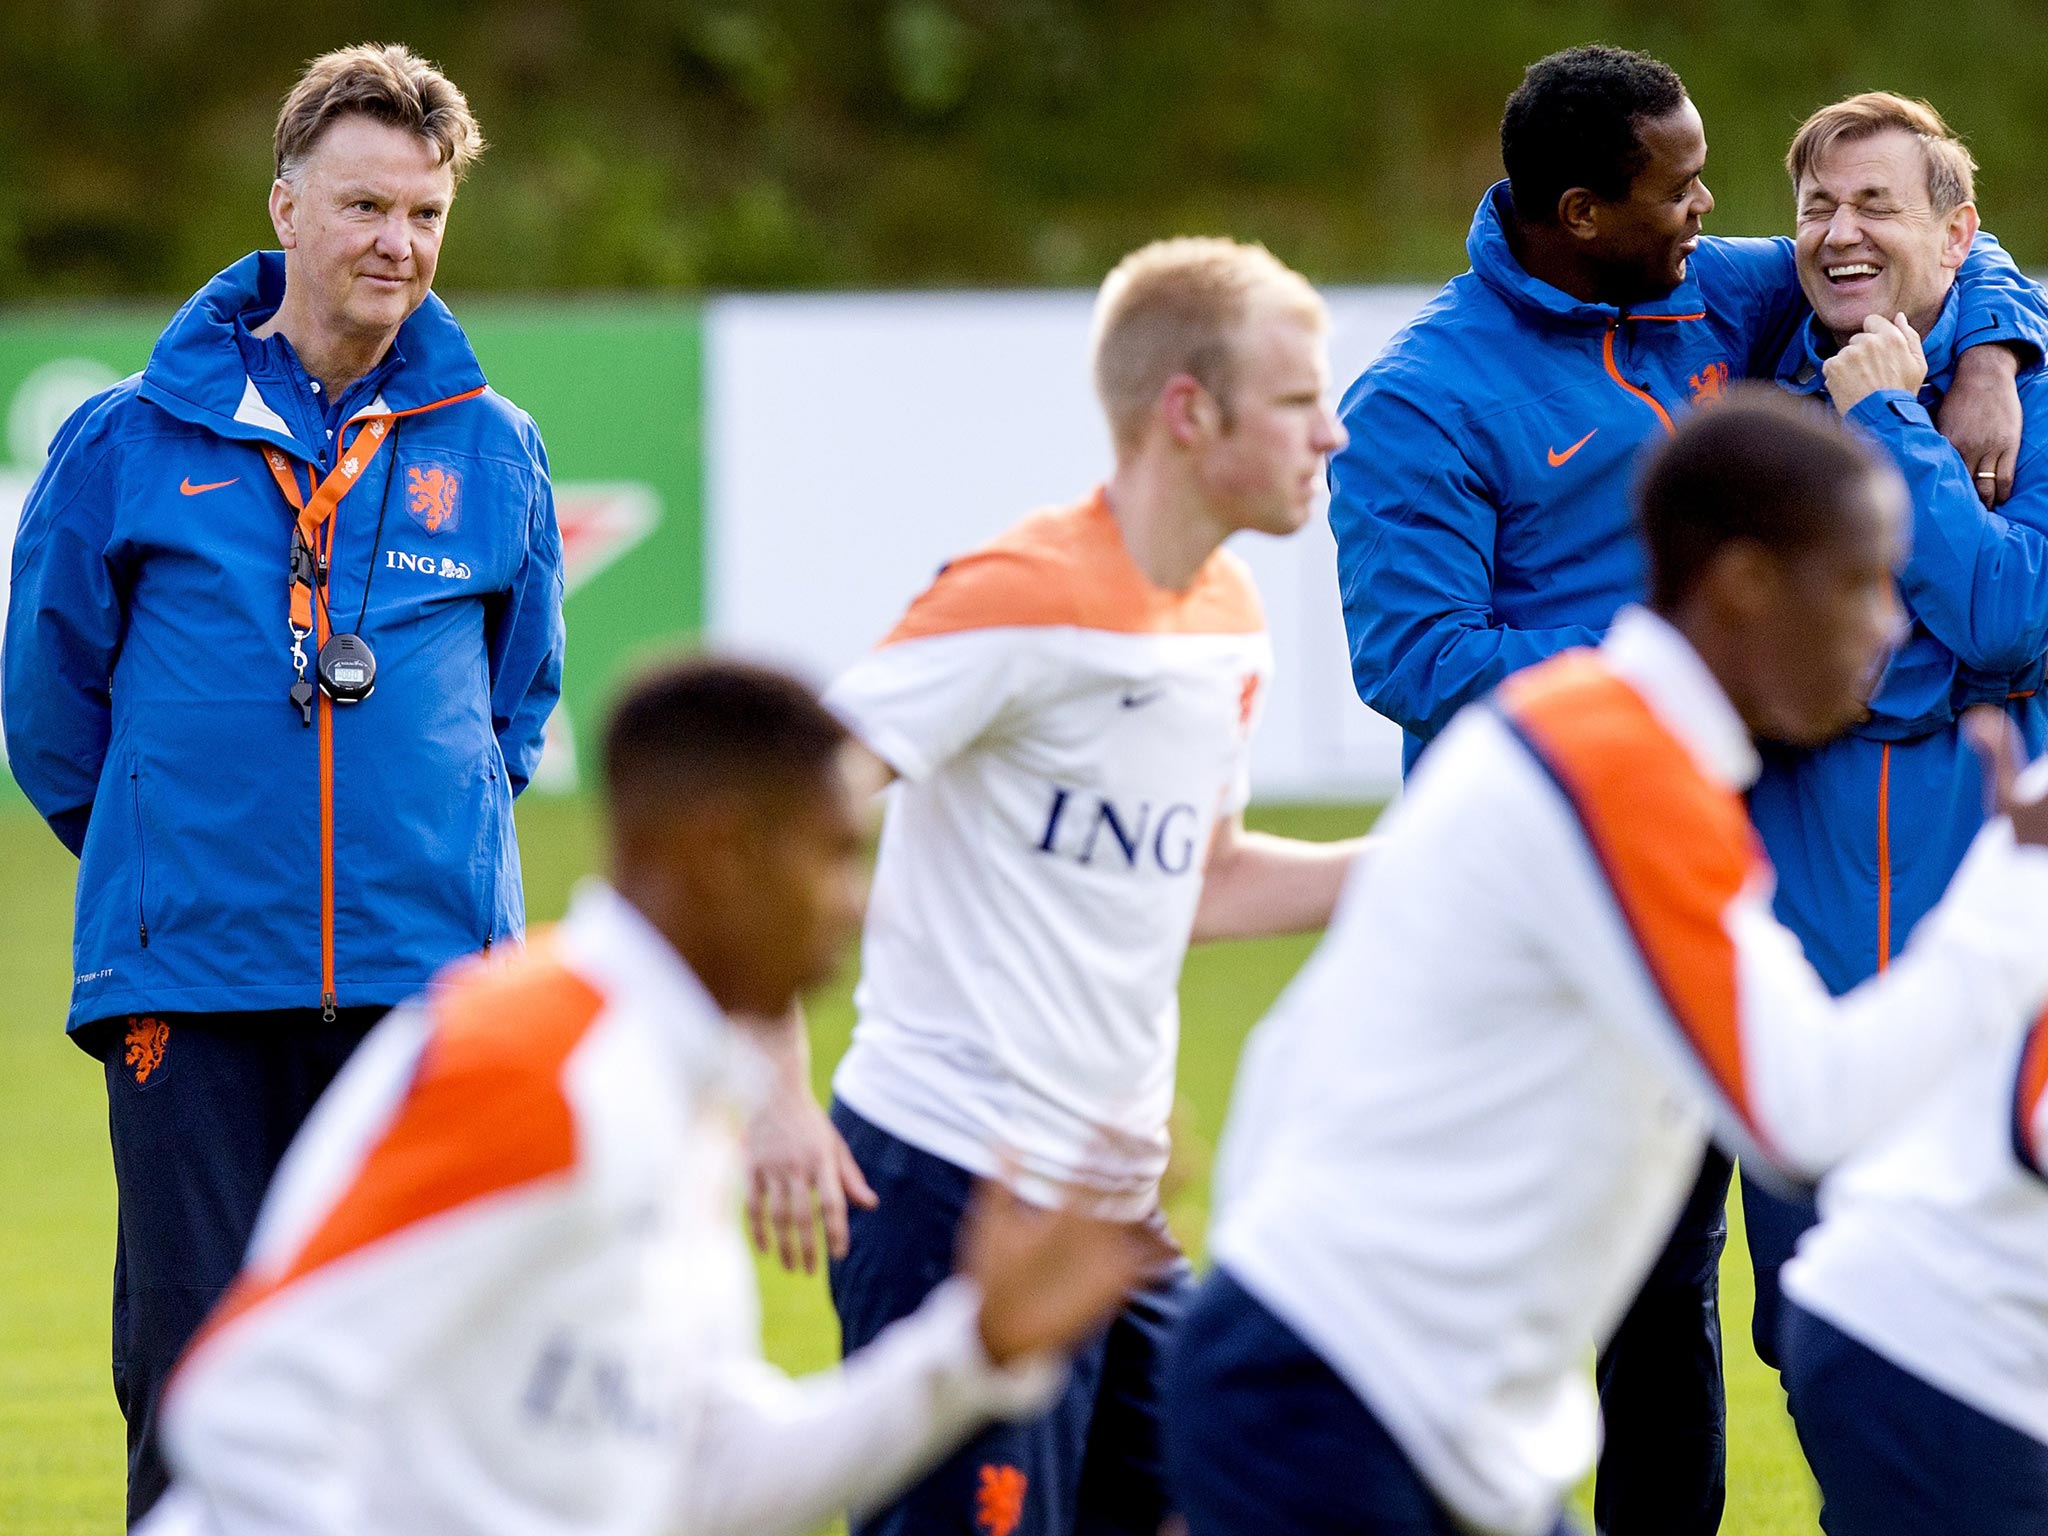 Louis van Gaal looks on as he leads training for his Netherlands side, who appear in good spirits ahead of his announcement of their 23-man squad for the World Cup